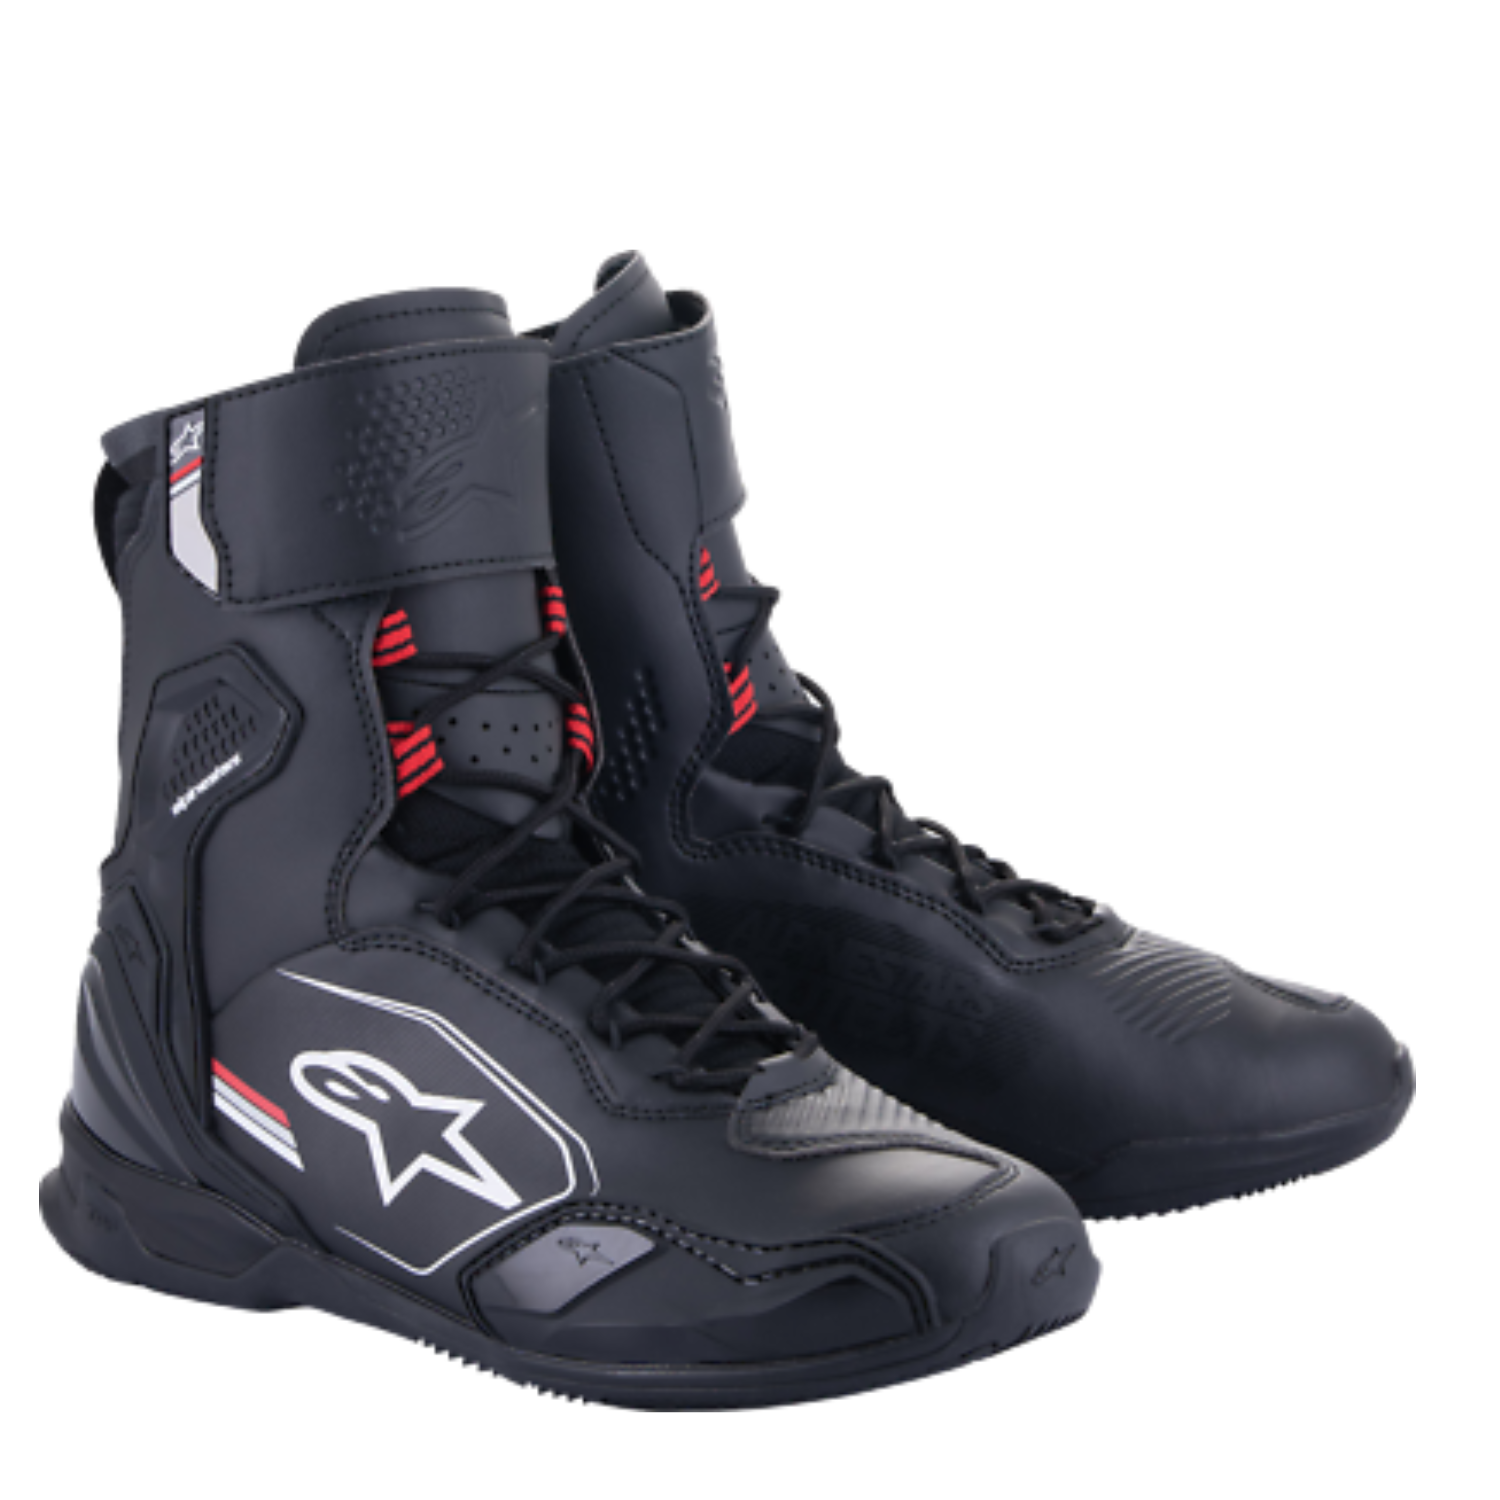 Image of EU Alpinestars Superfaster Shoes Black Gray Bright Red Taille US 11